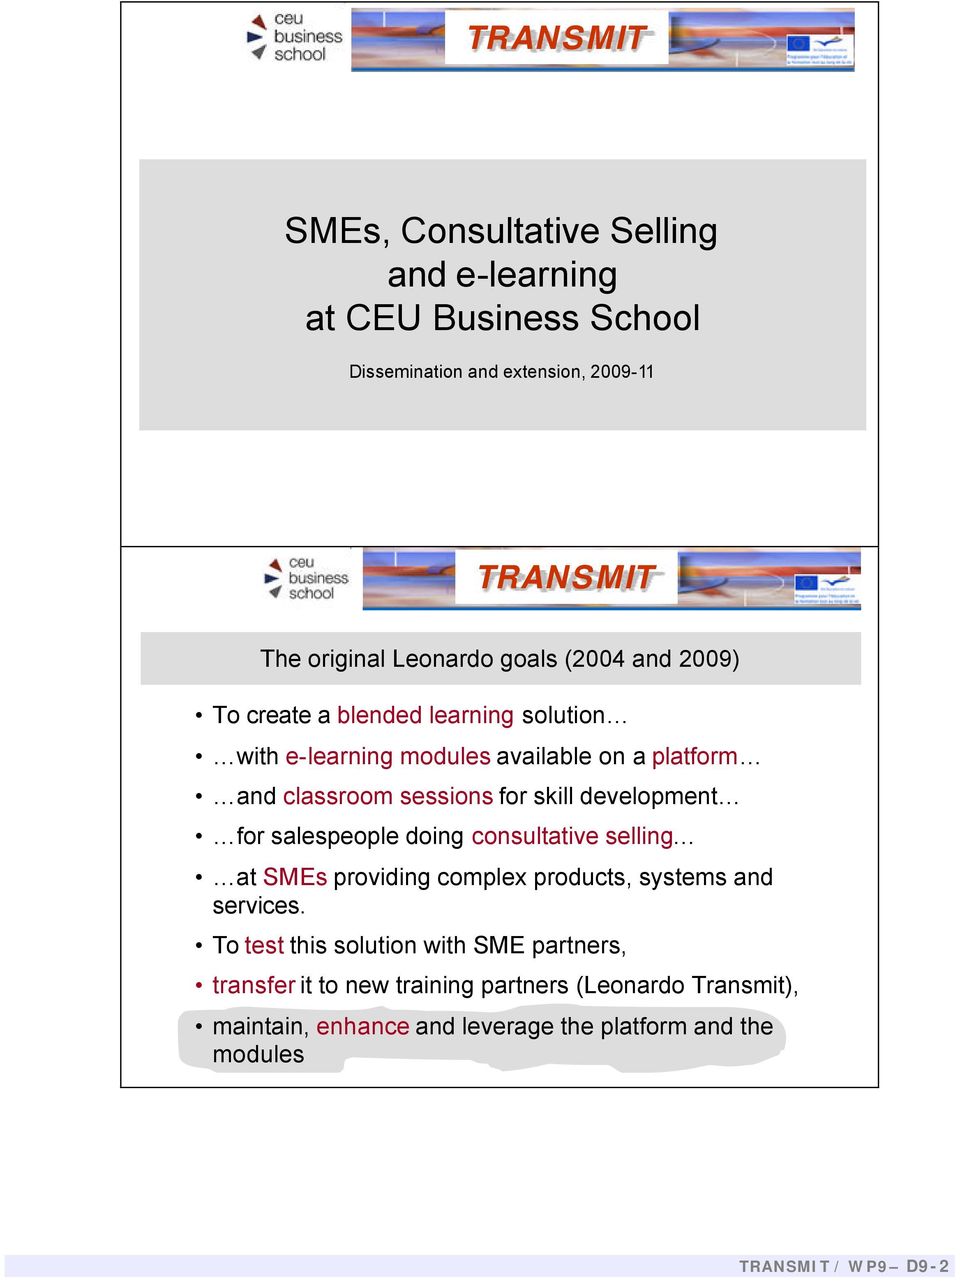 skill development for salespeople doing consultative selling at SMEs providing complex products, systems and services.